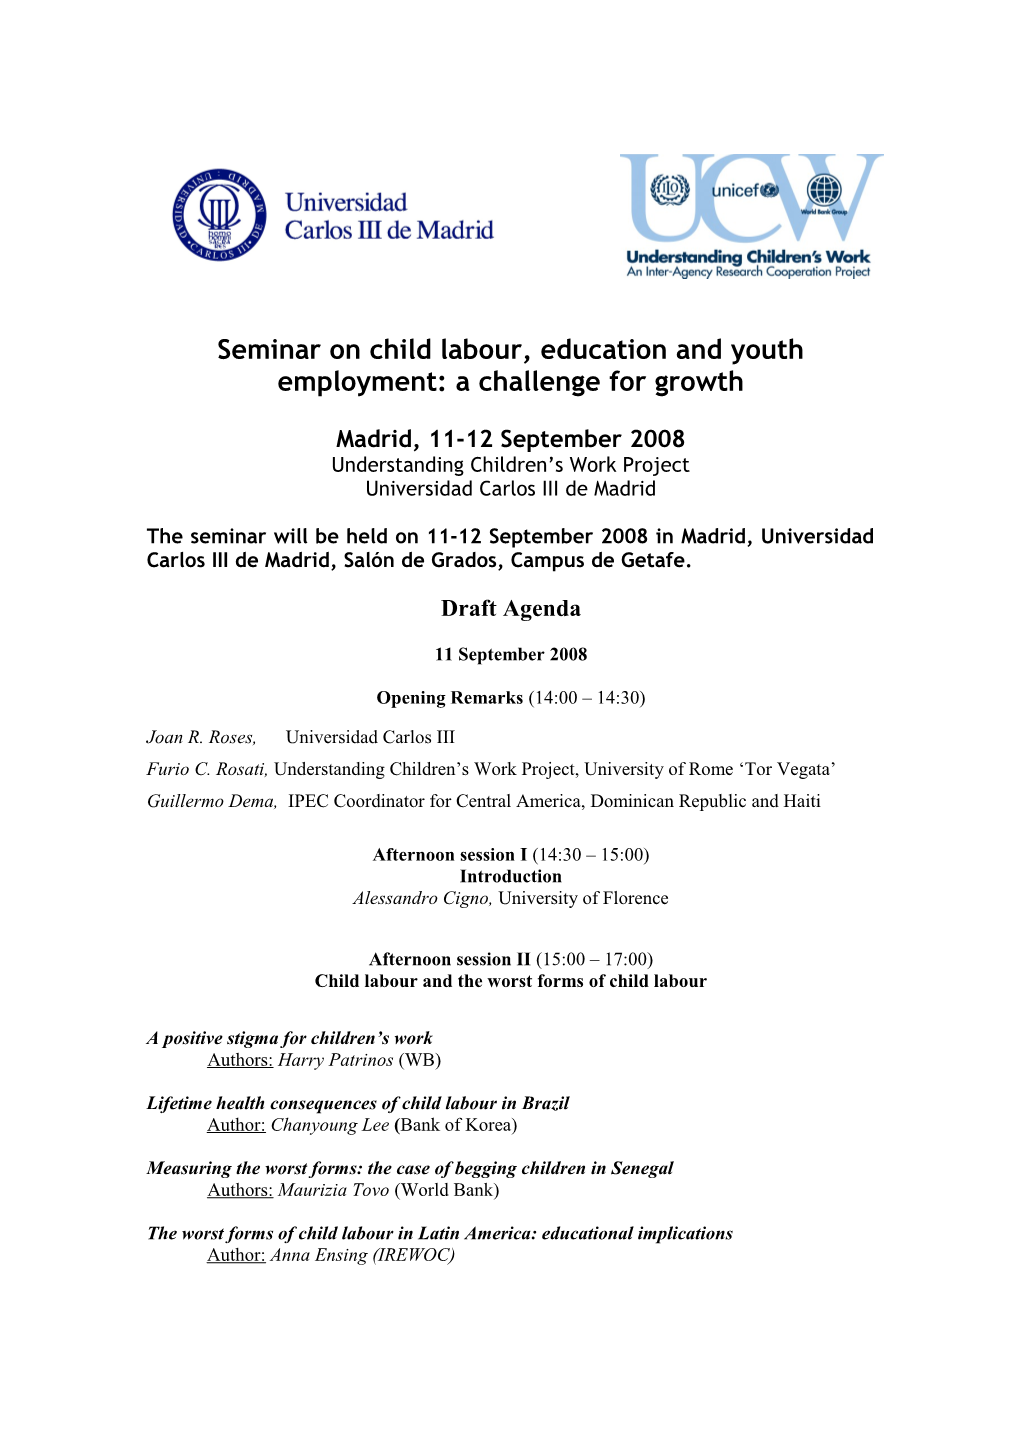 Seminar on Child Labour, Education and Youth Employment: a Challenge for Growth